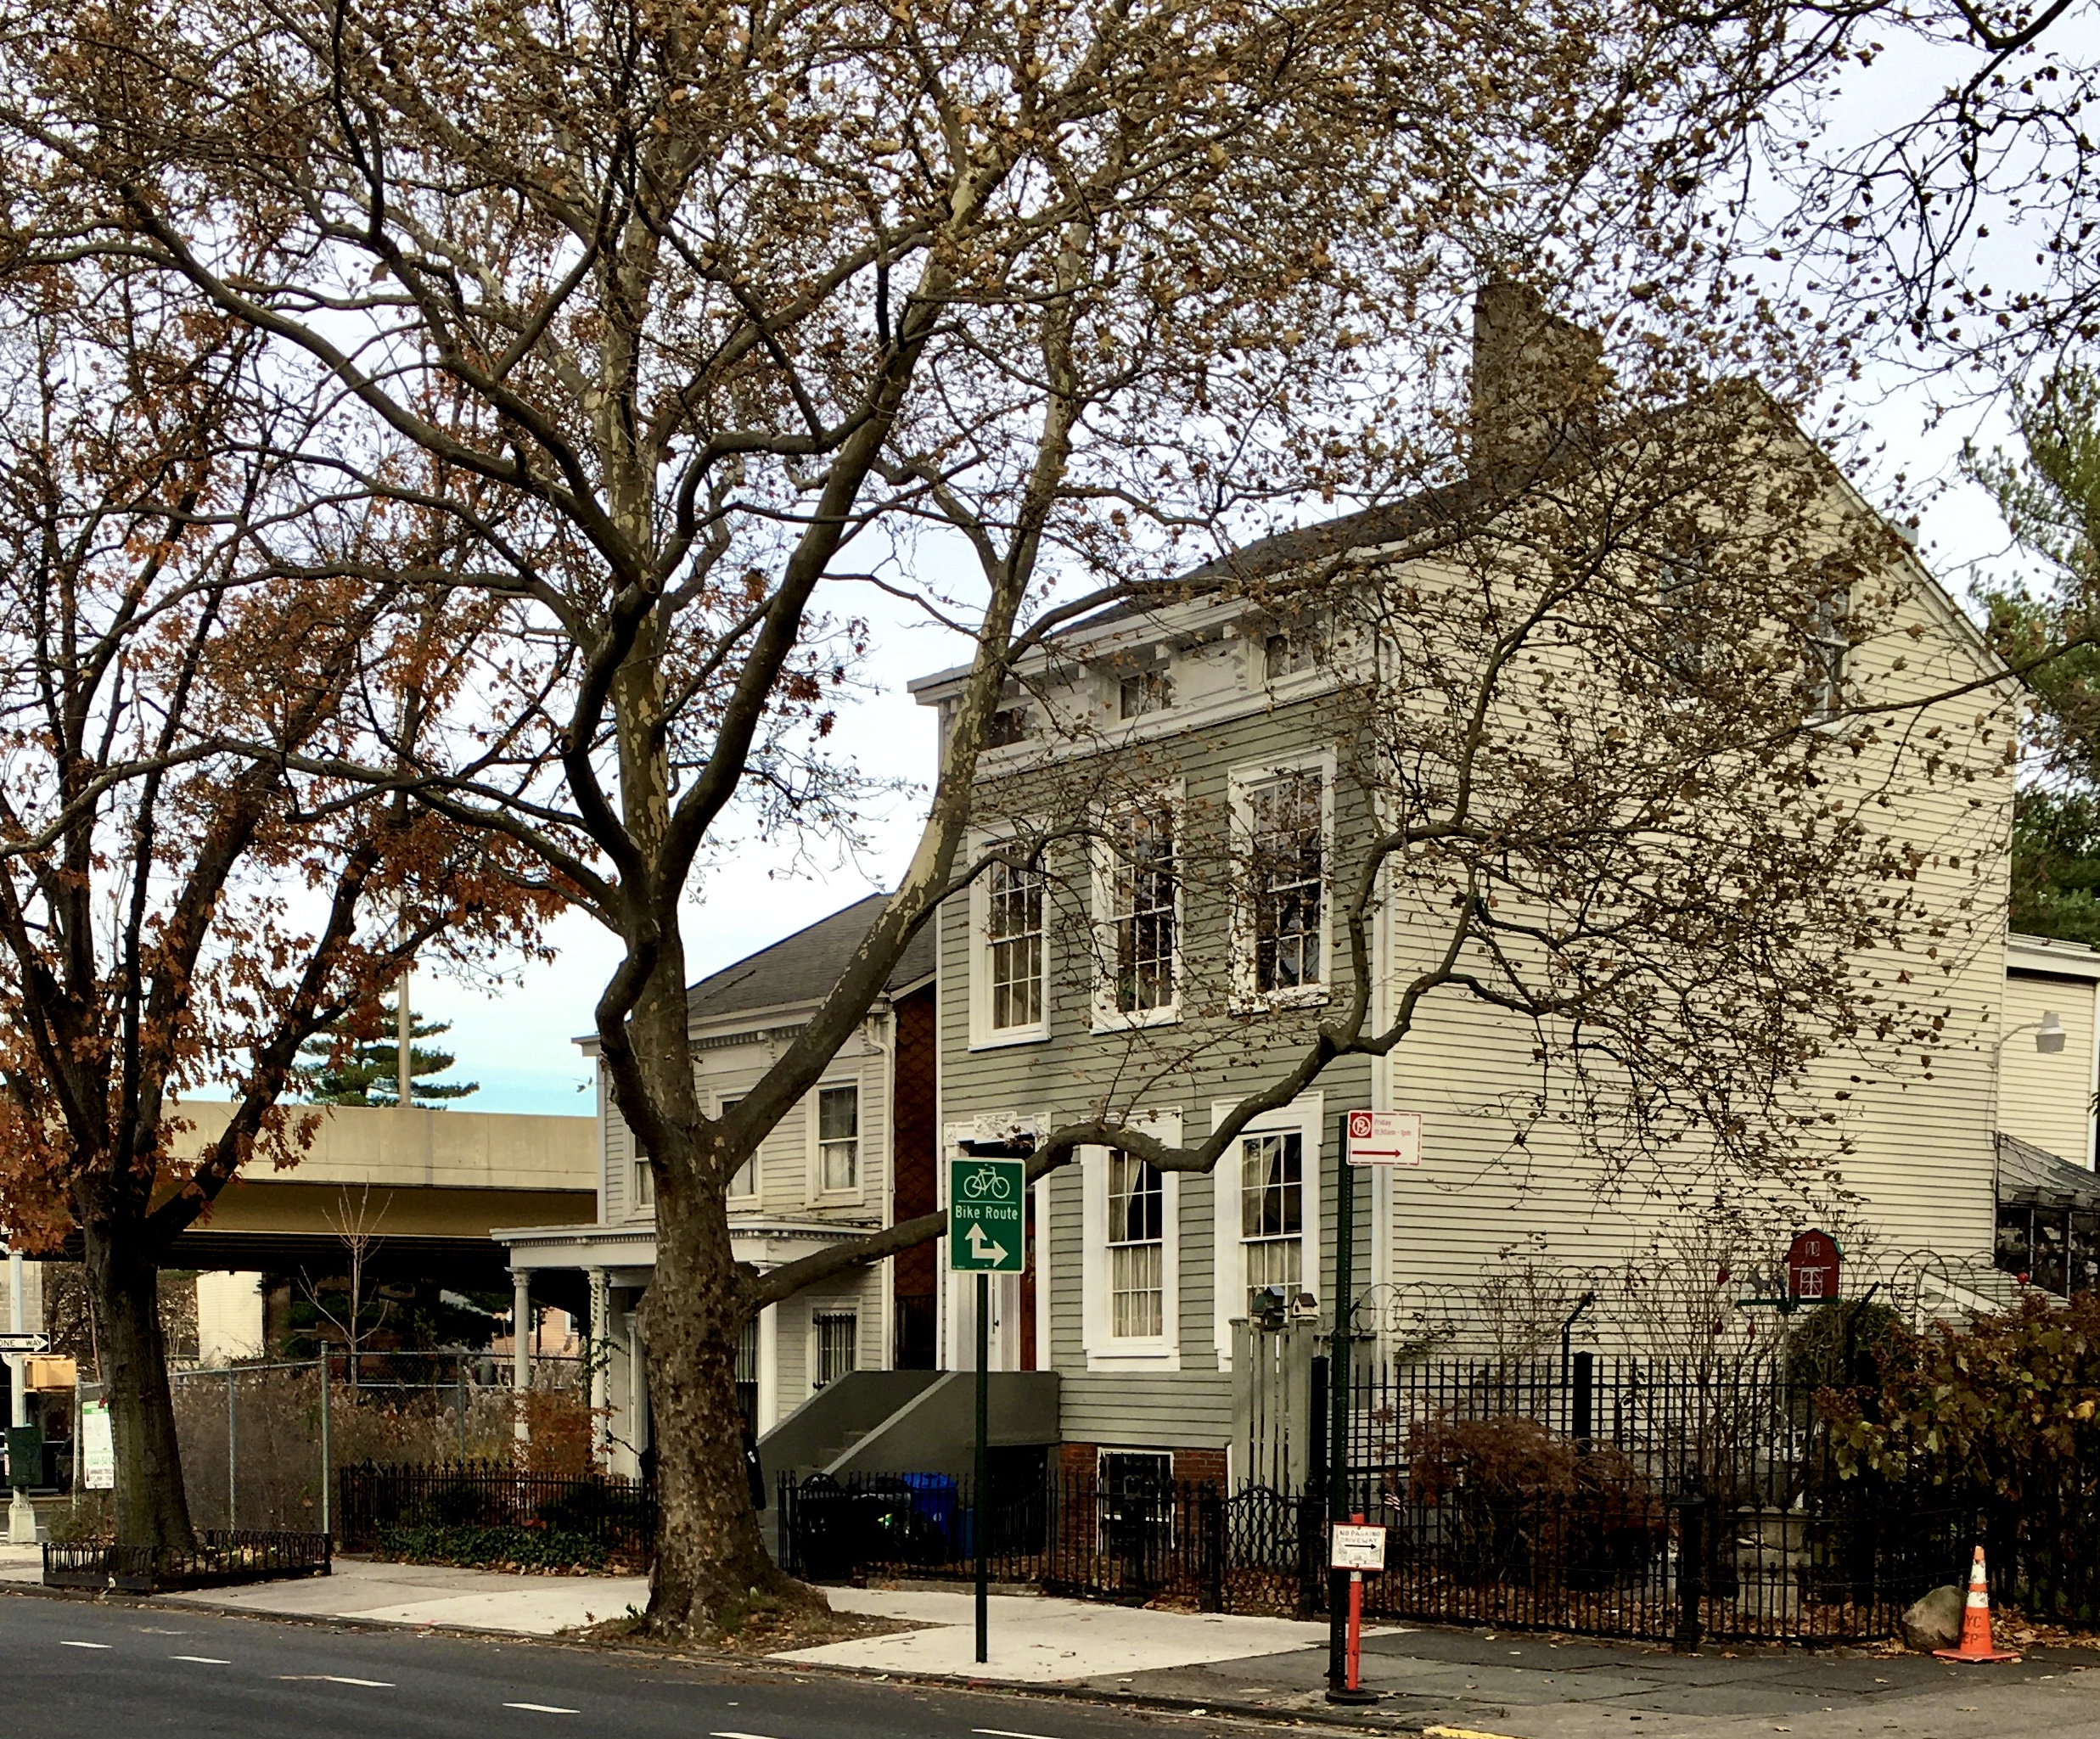 Here’s a glimpse of Vanderbilt Avenue in the Wallabout Historic District. Photo: Lore Croghan/Brooklyn Eagle